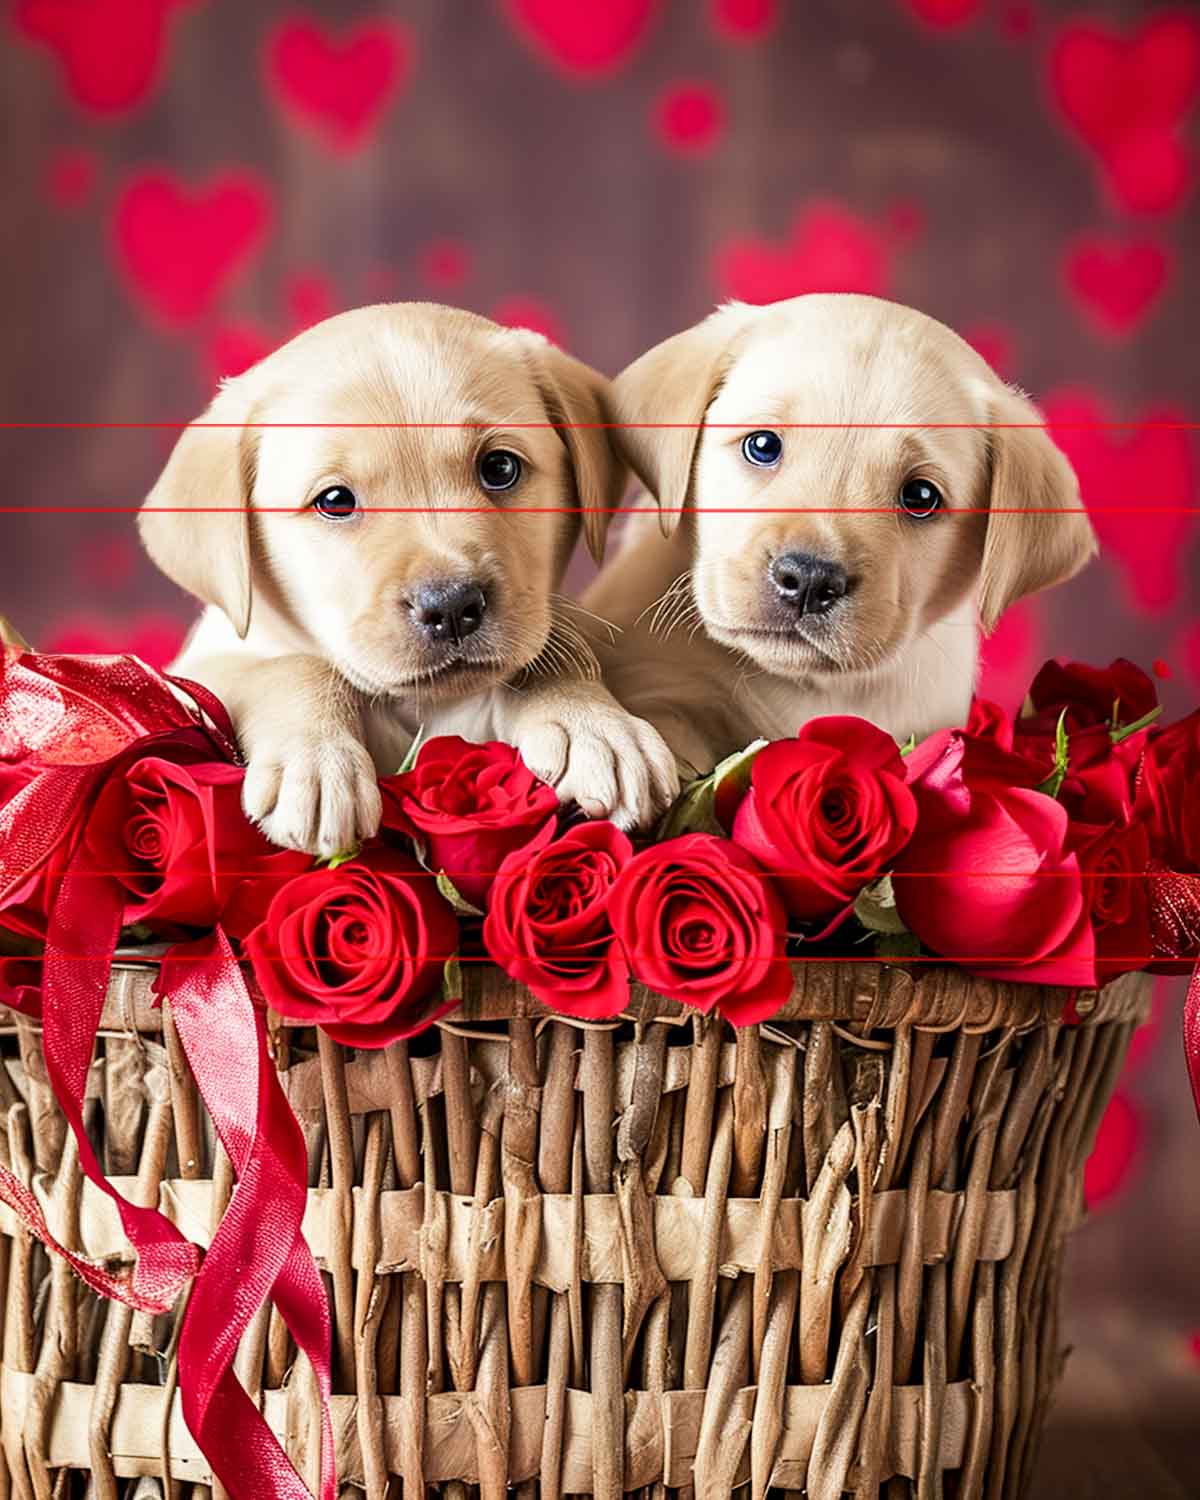 Yellow Labrador Retriever Valentine Puppies, 2 adorable yellow labs in a wicker basket with beautiful red roses against a woody wall with subtle hearts